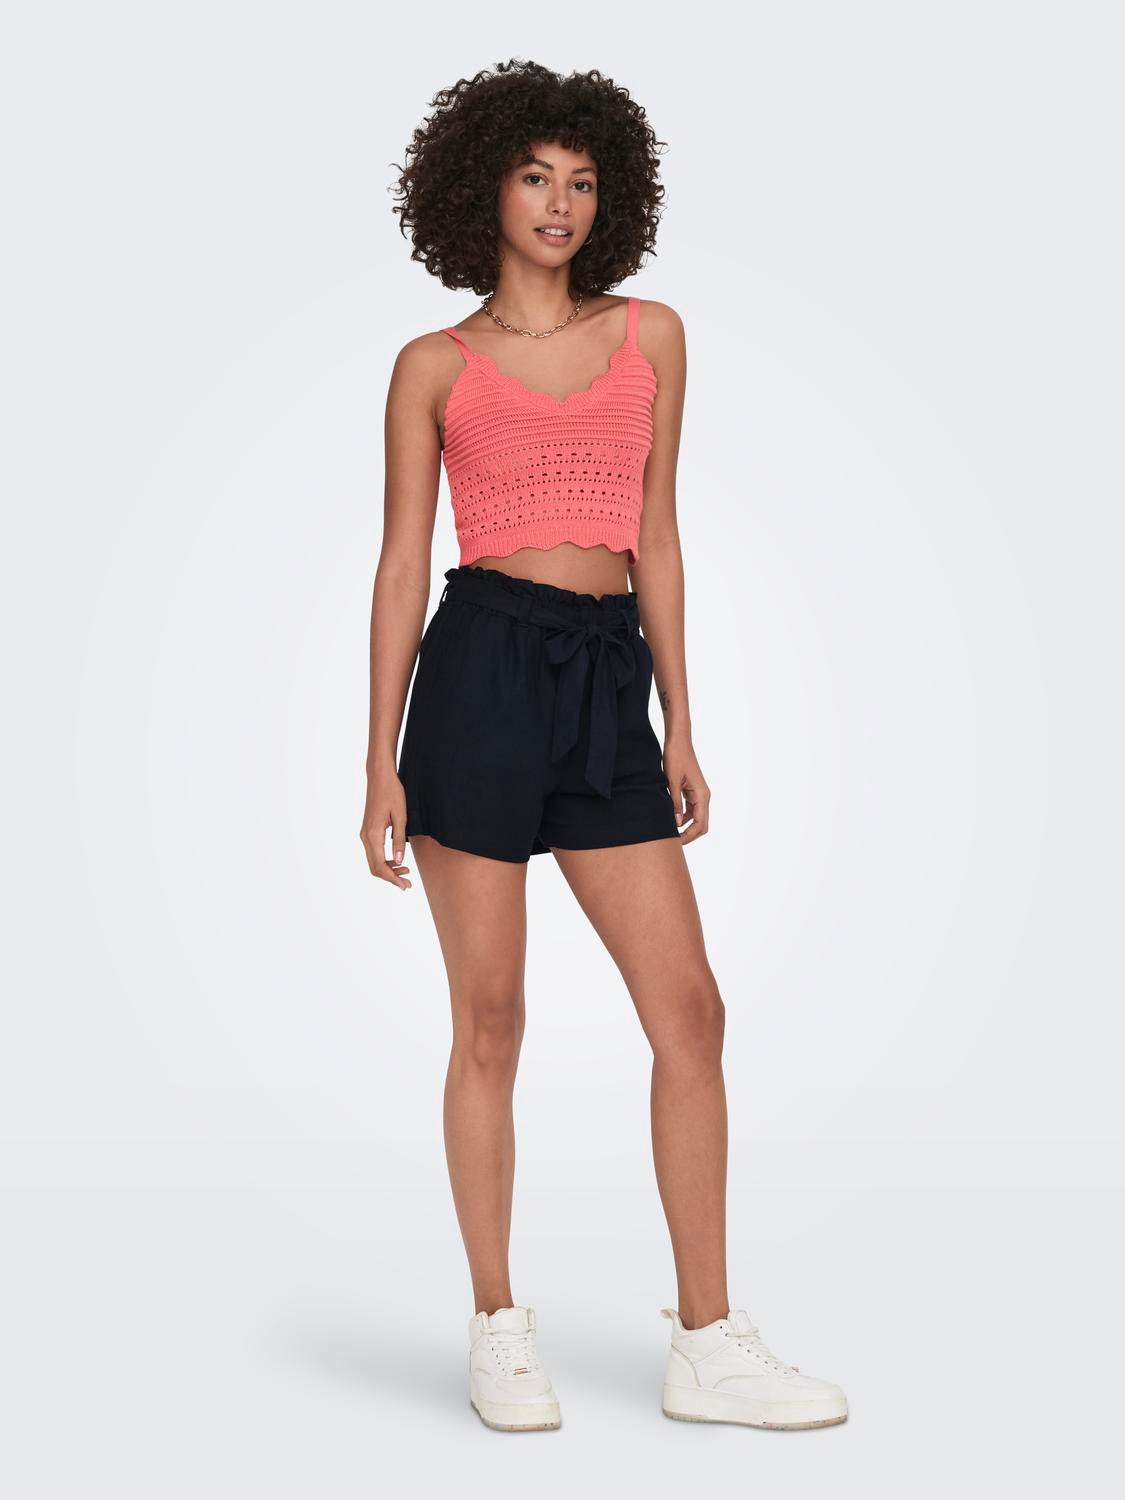 ONLY Knit Cropped Top -Tea Rose - 15290562